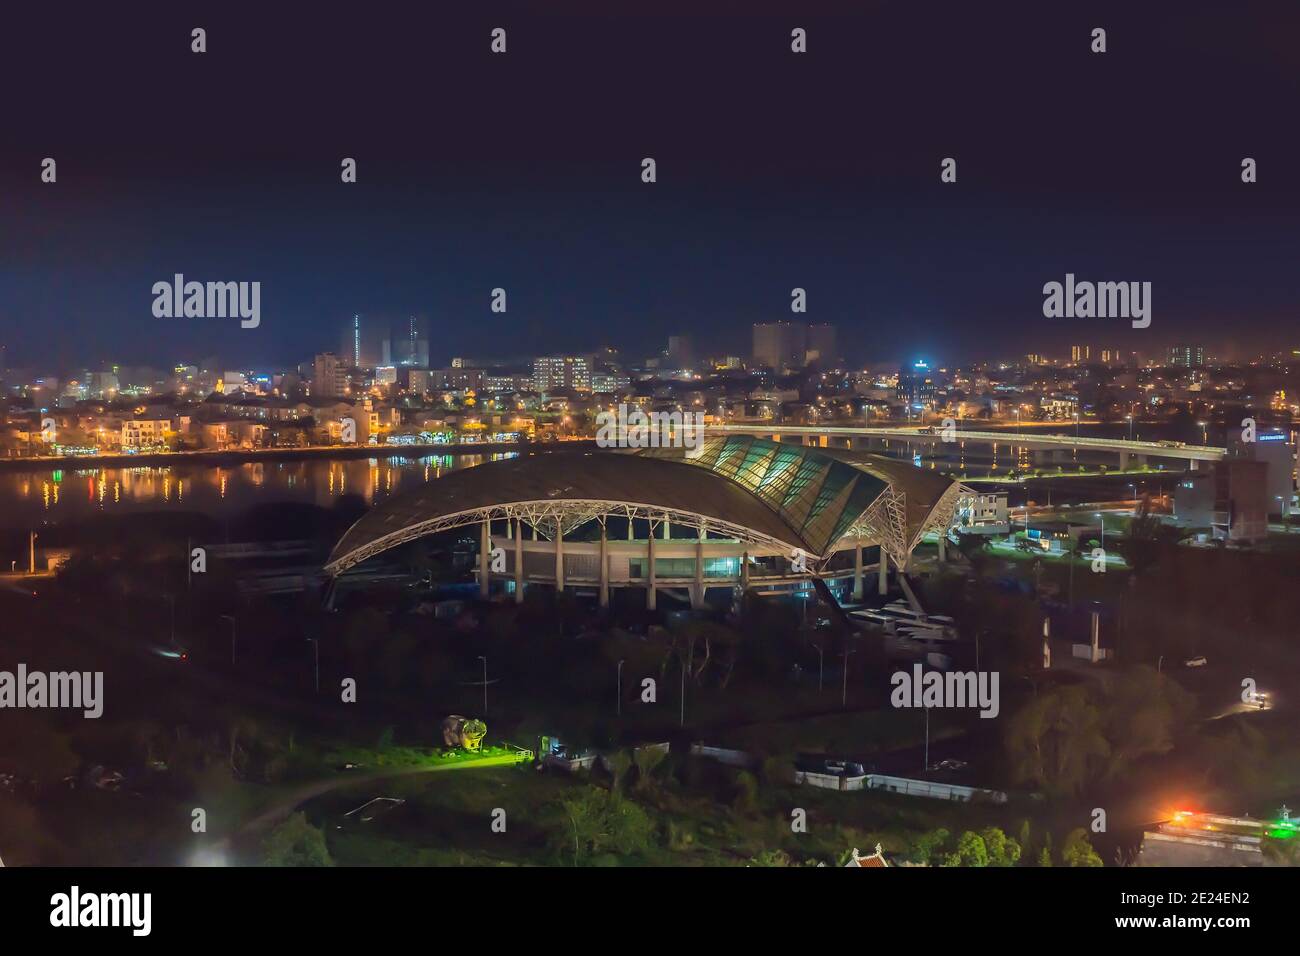 The architecture shimmering under the night-lit city makes the city more vibrant in Da Nang, Vietnam Stock Photo